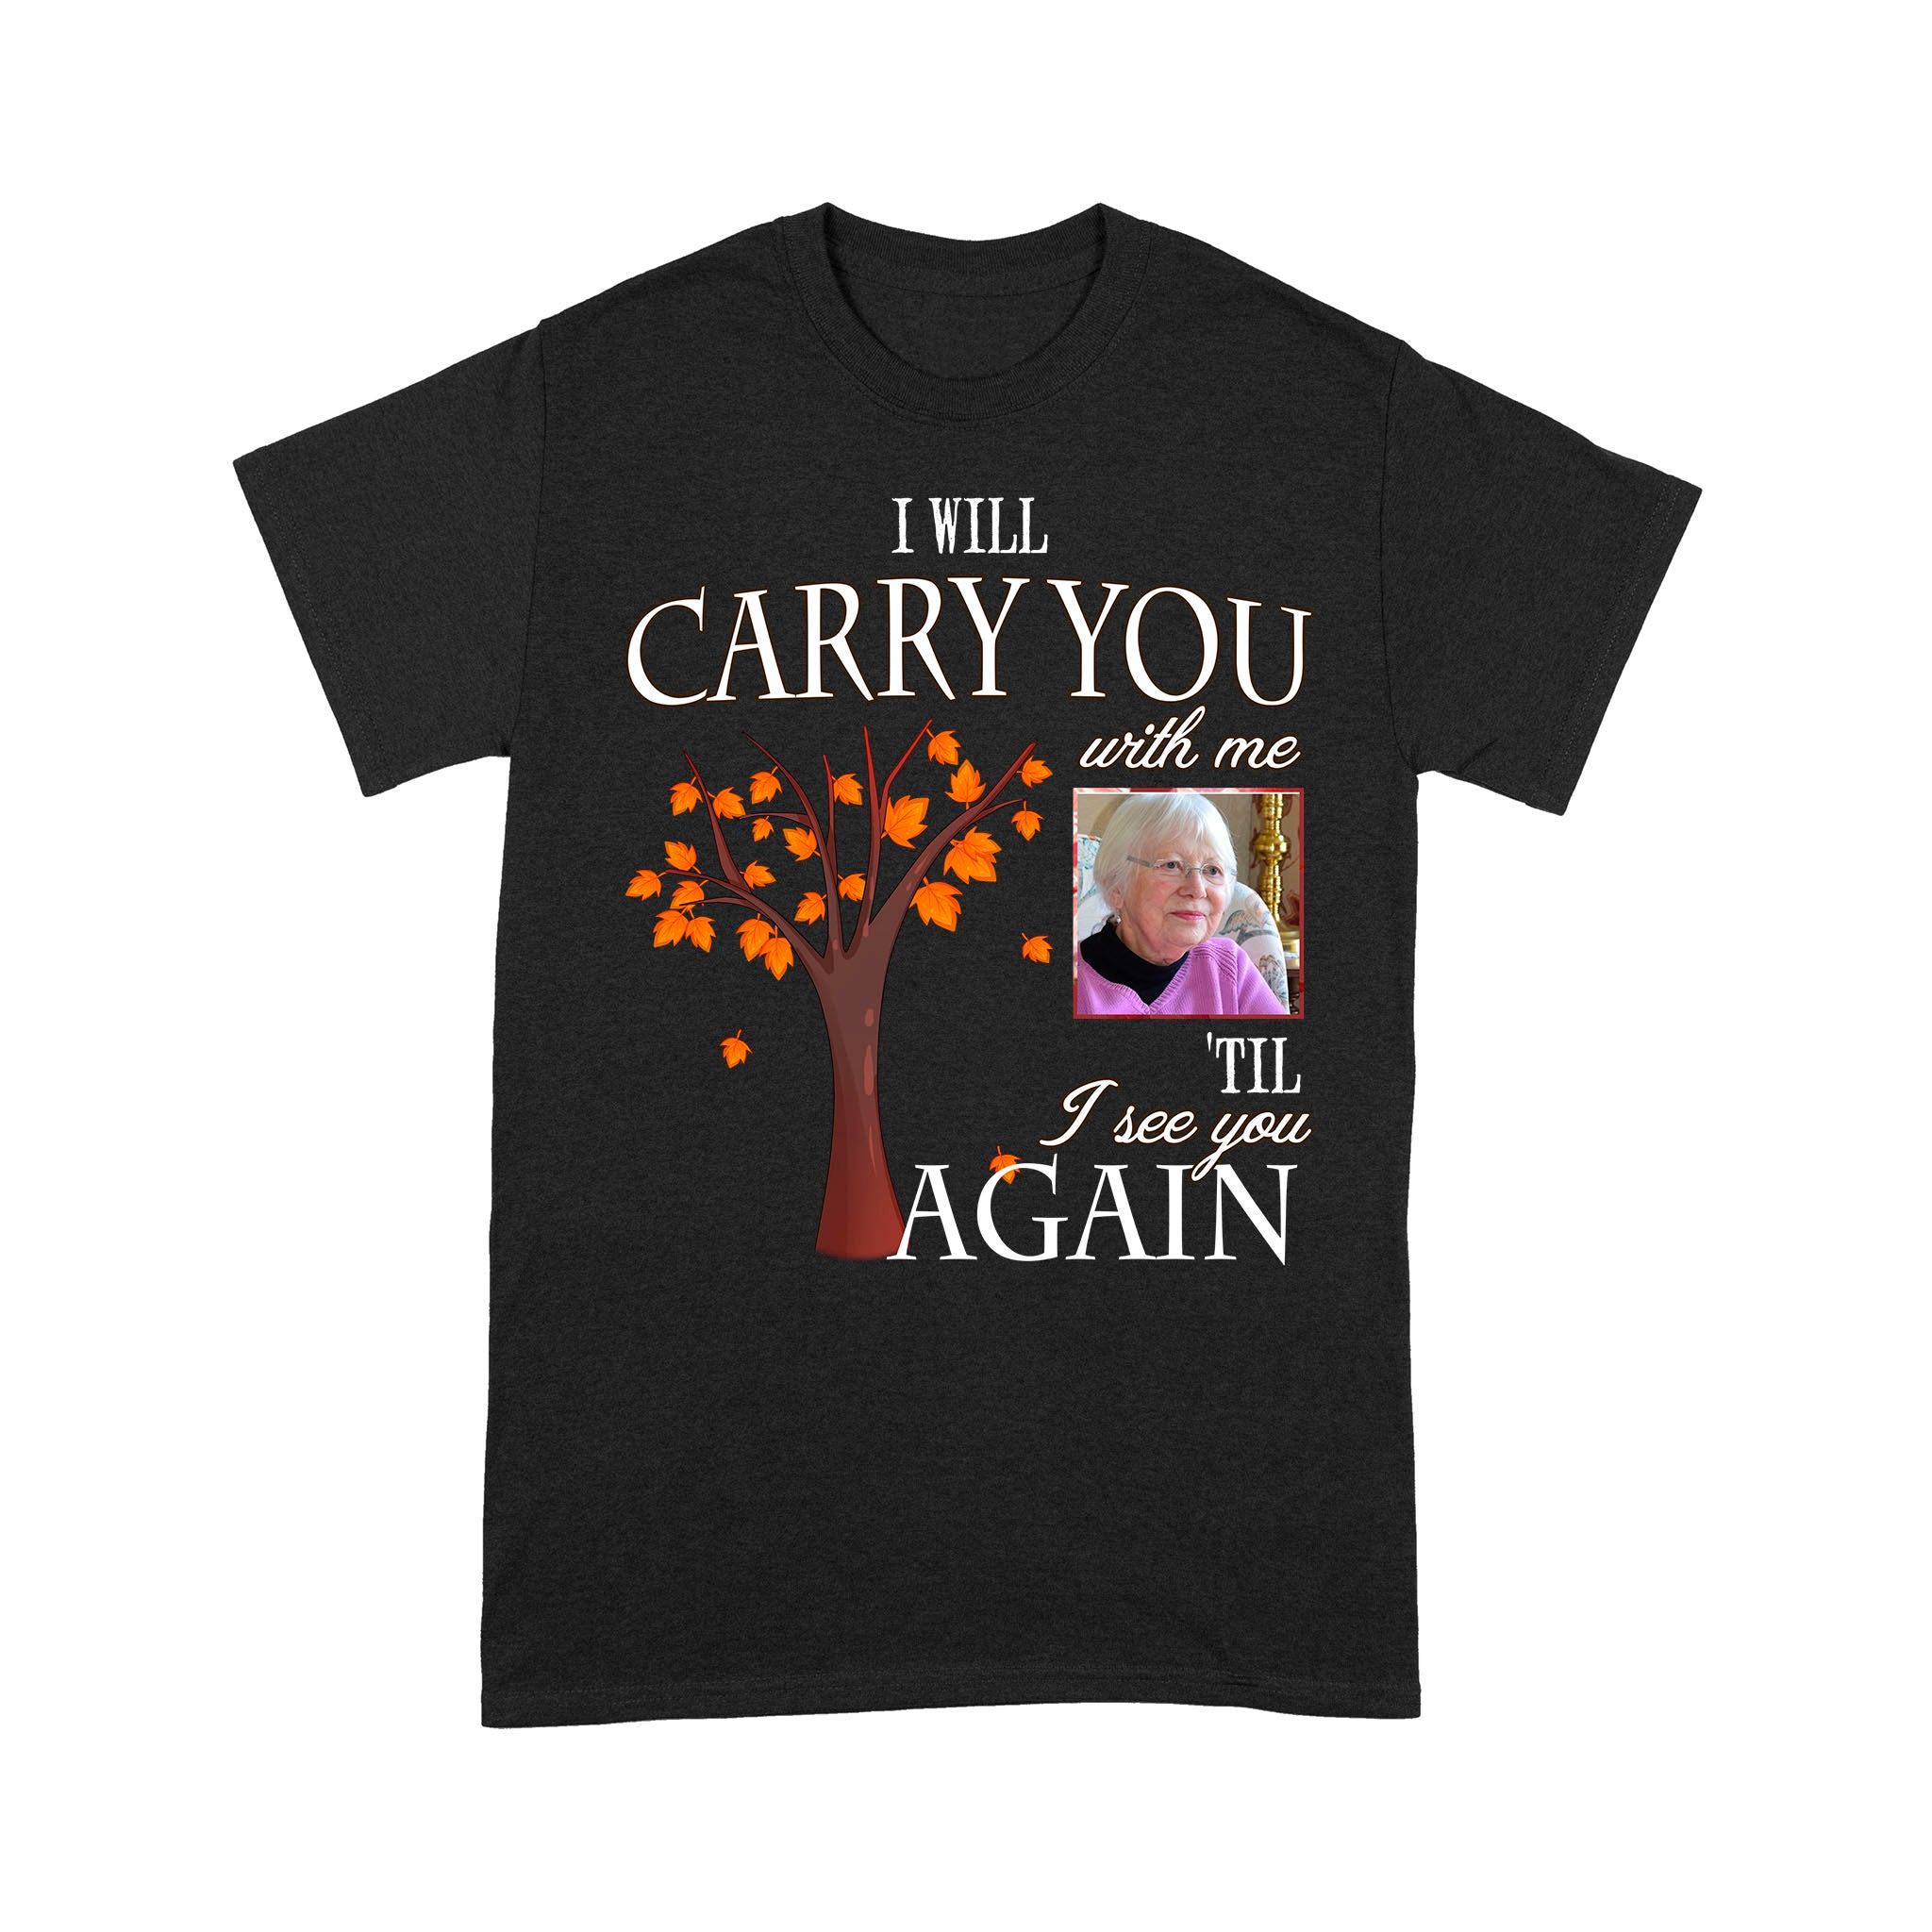 Personalized Remembrance Shirt Memorial Shirt - Carry You With Me - In Loving Memory Shirt Memorial Gift for Loss of Loved One - JTS79